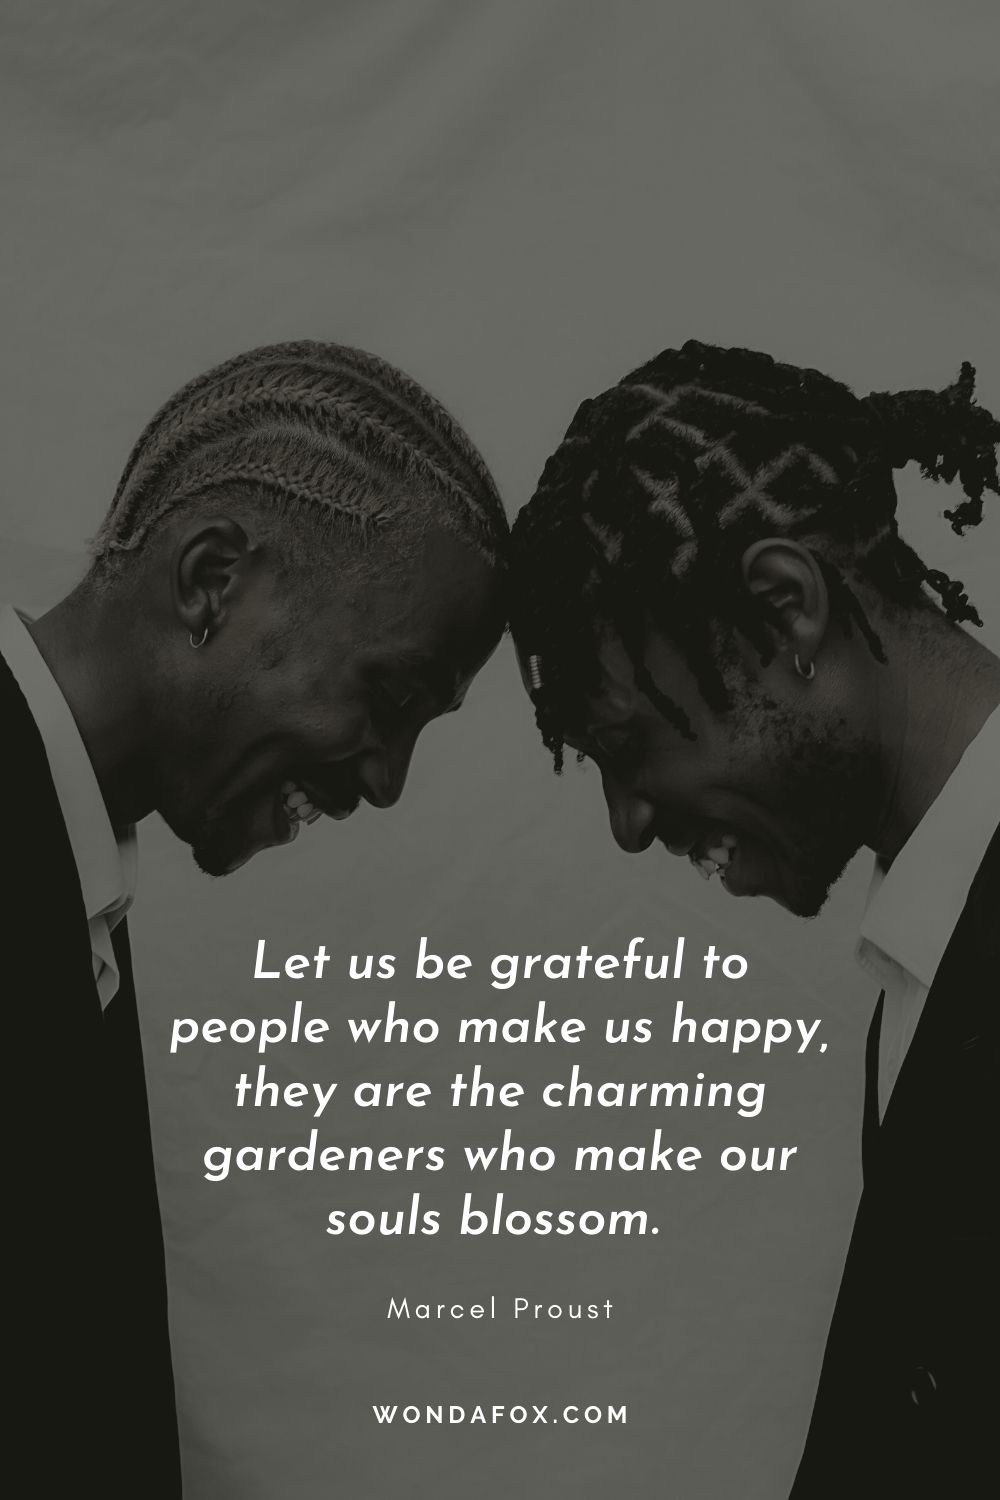 Let us be grateful to people who make us happy, they are the charming gardeners who make our souls blossom. 